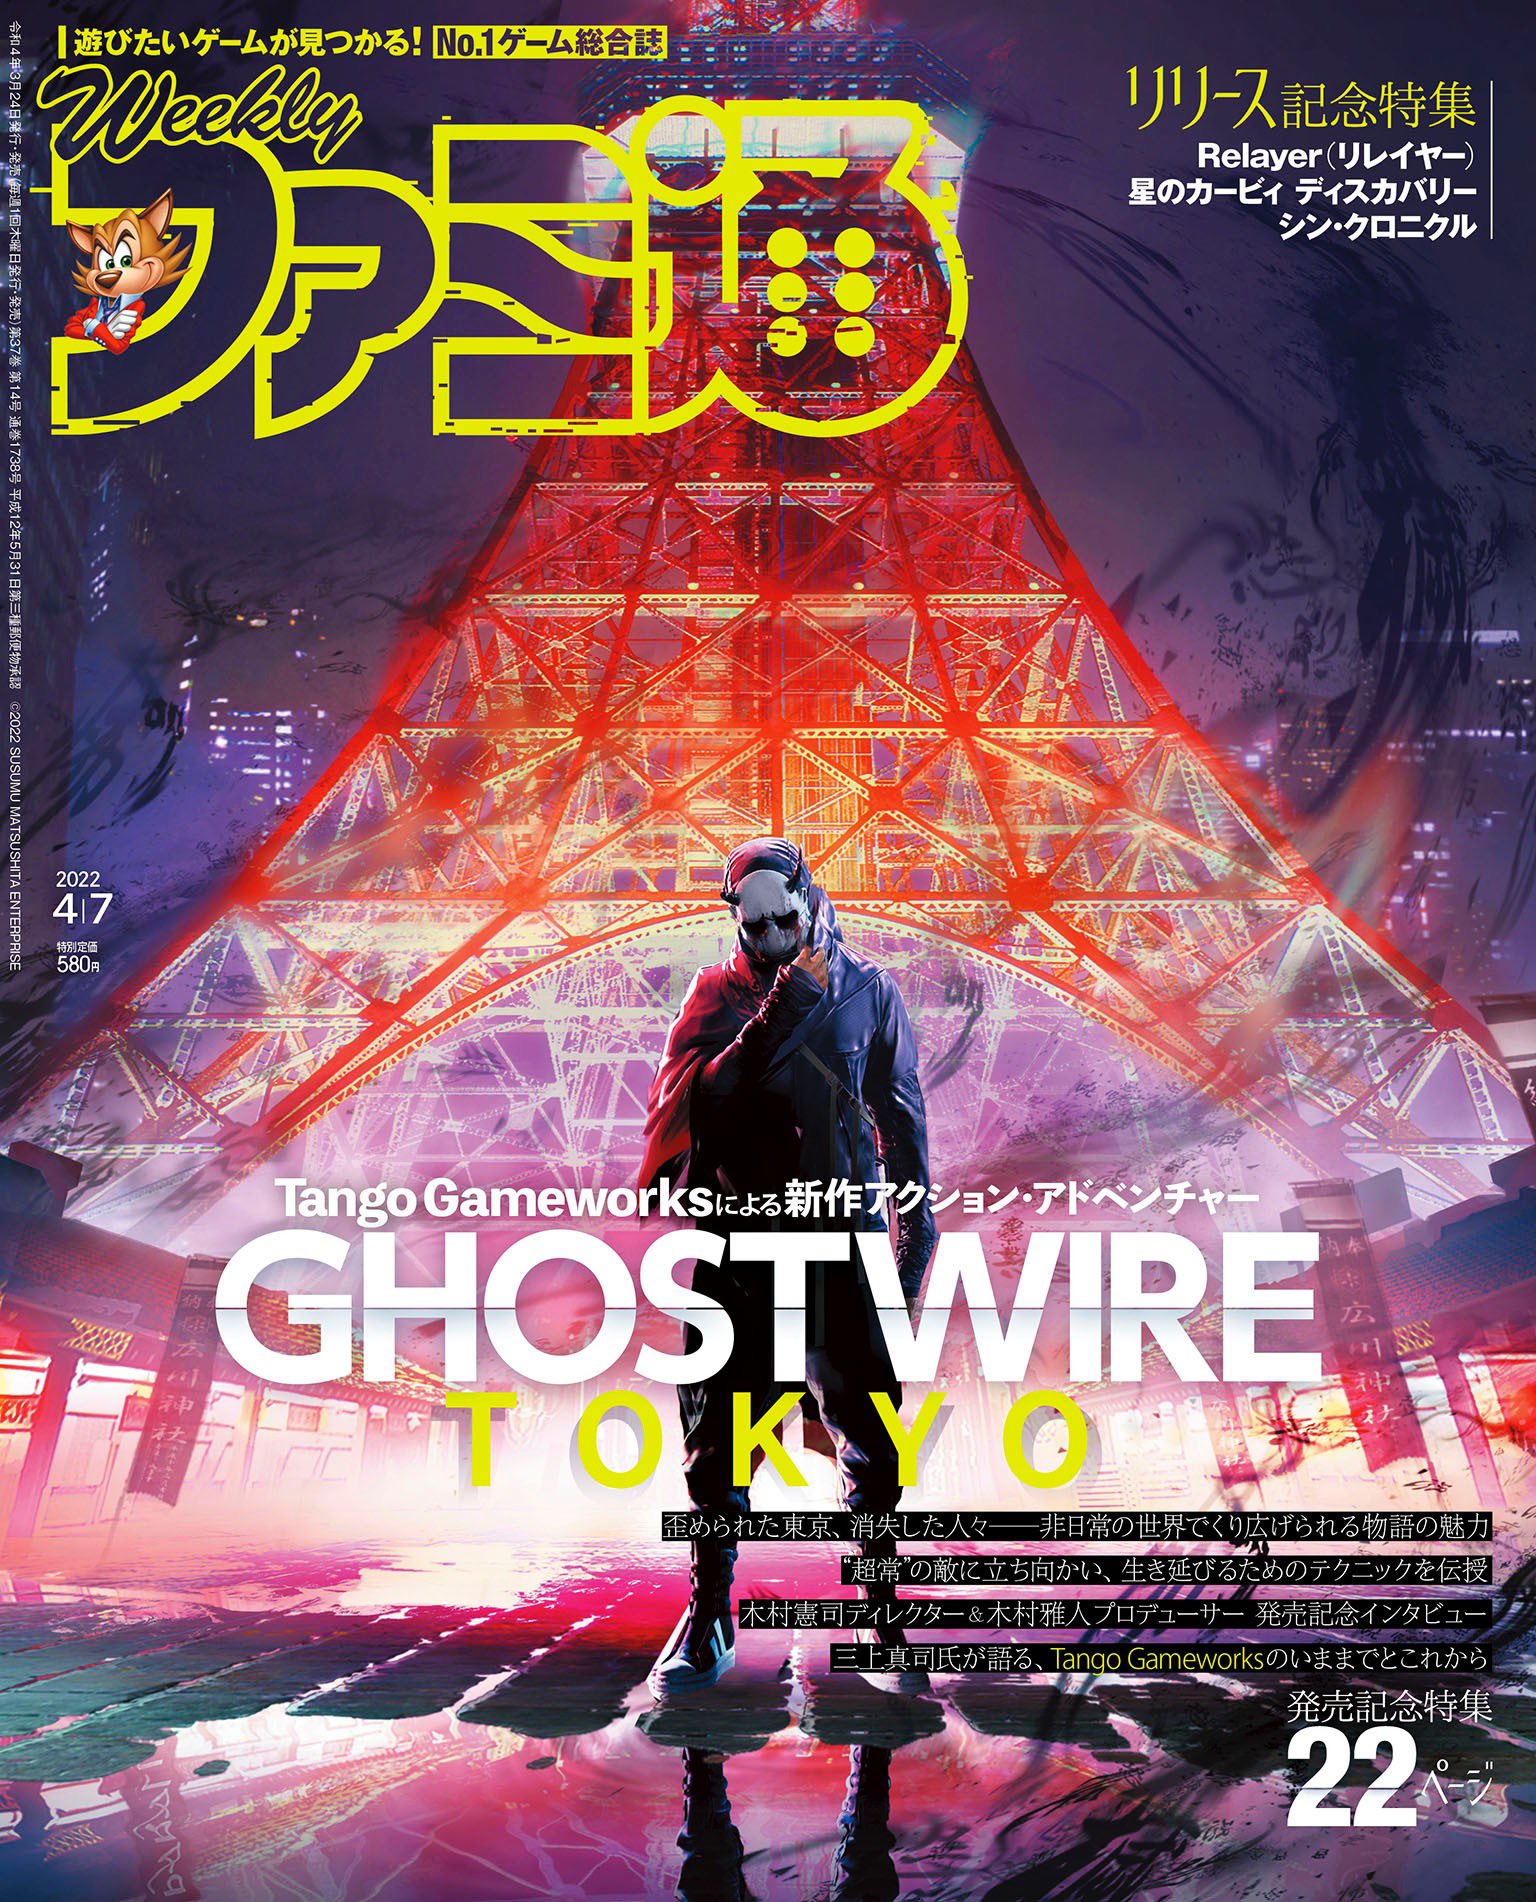 Famitsu April 7th issue featuring Ghostwire: Tokyo